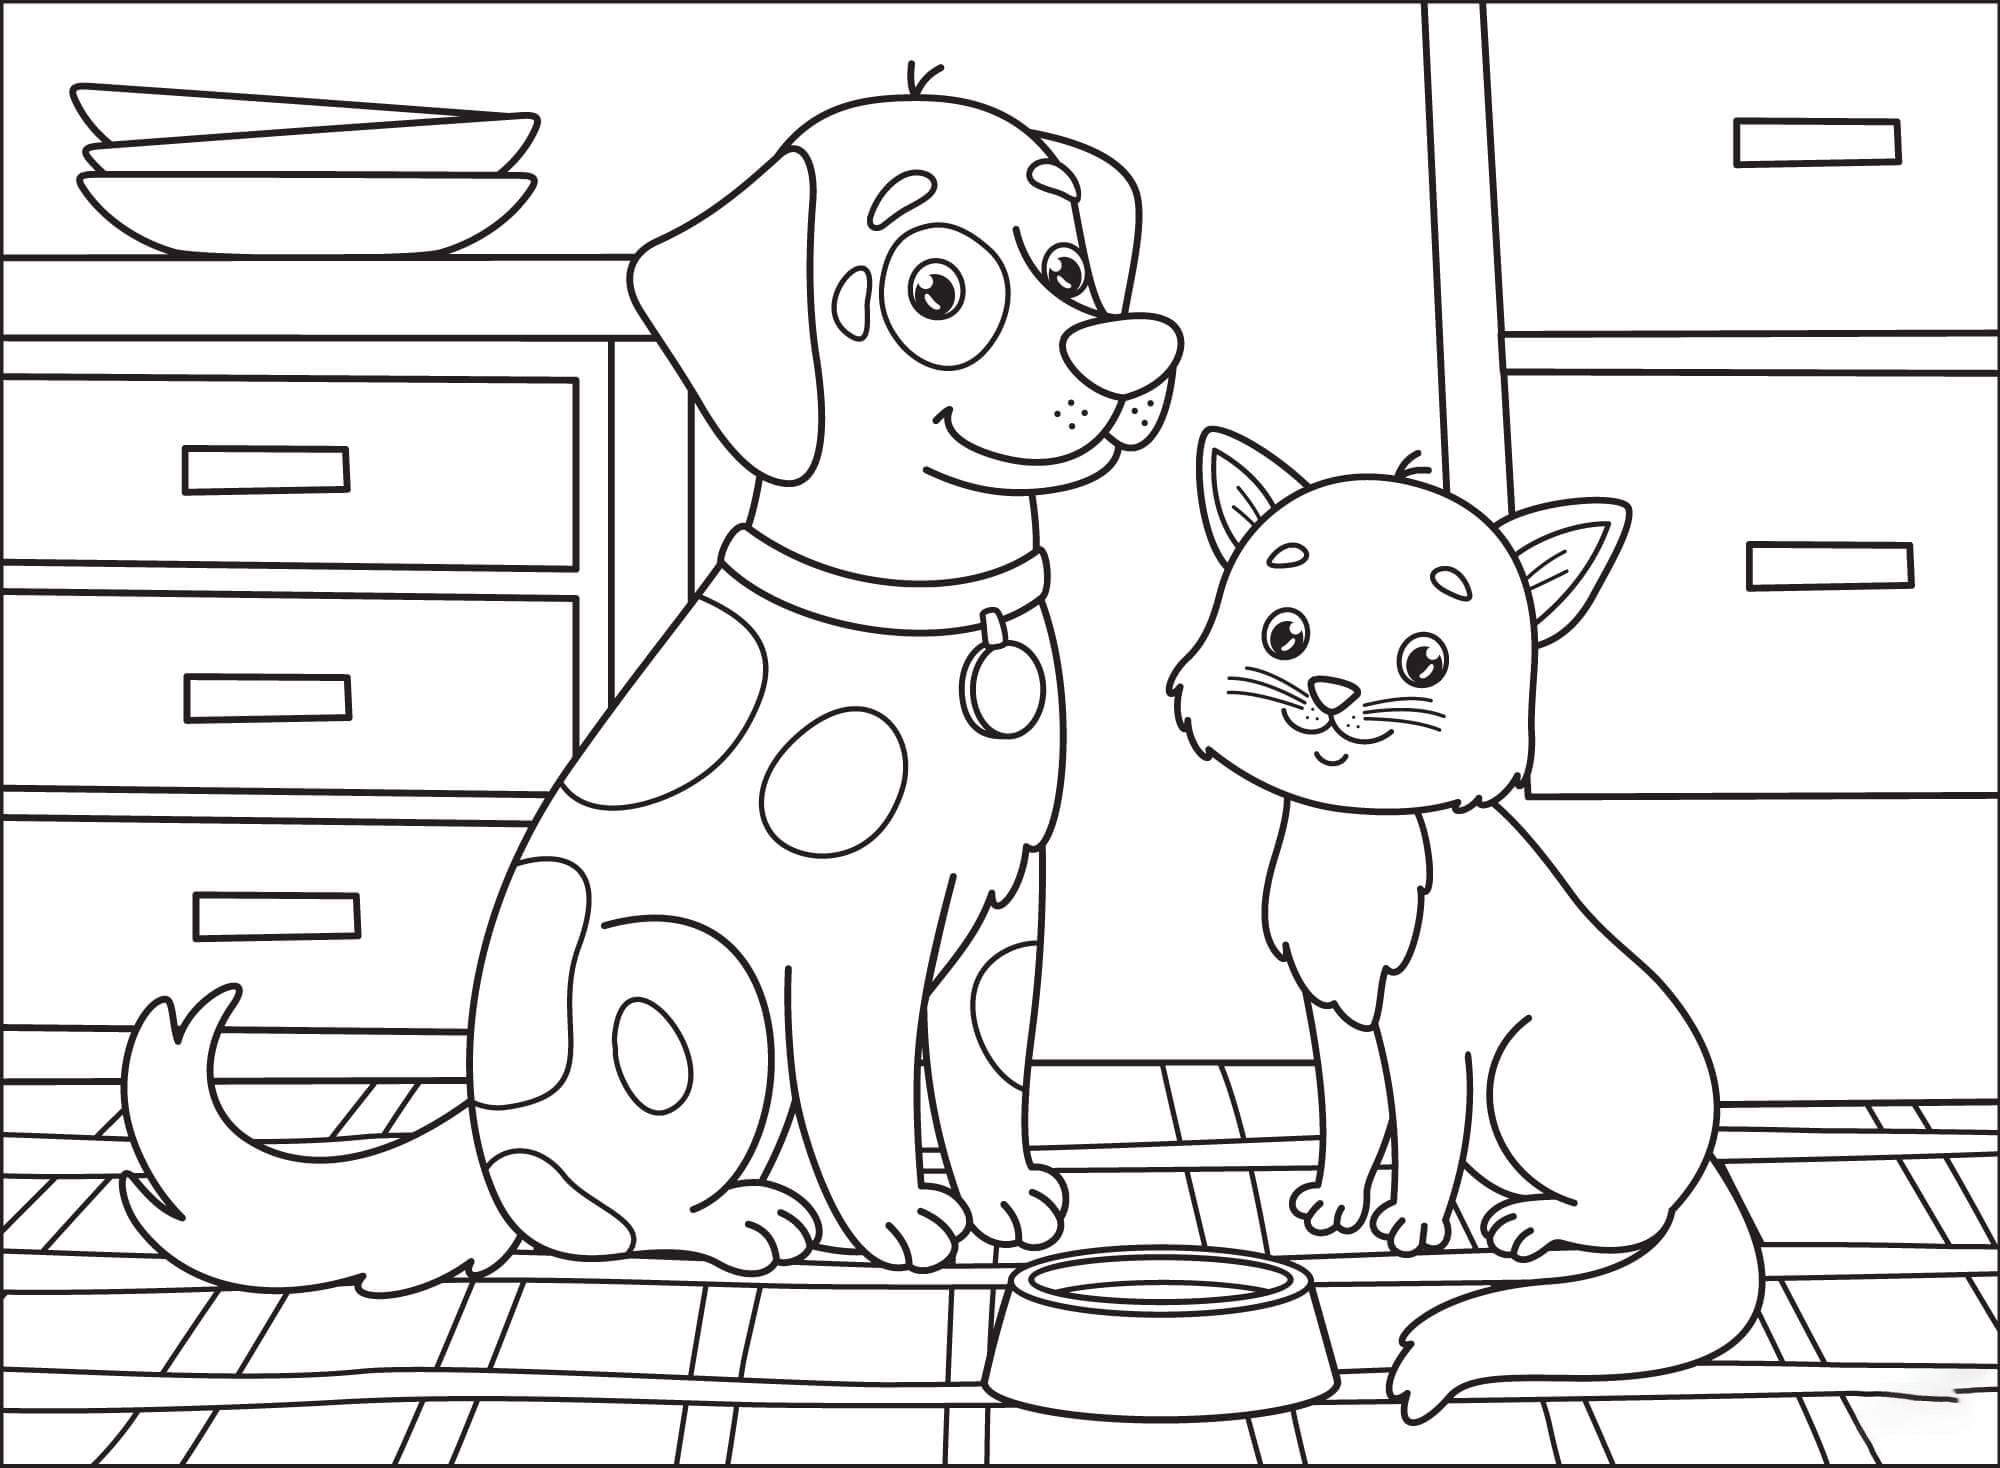 Dog Coloring Pages Coloring Pages For Kids And Adults